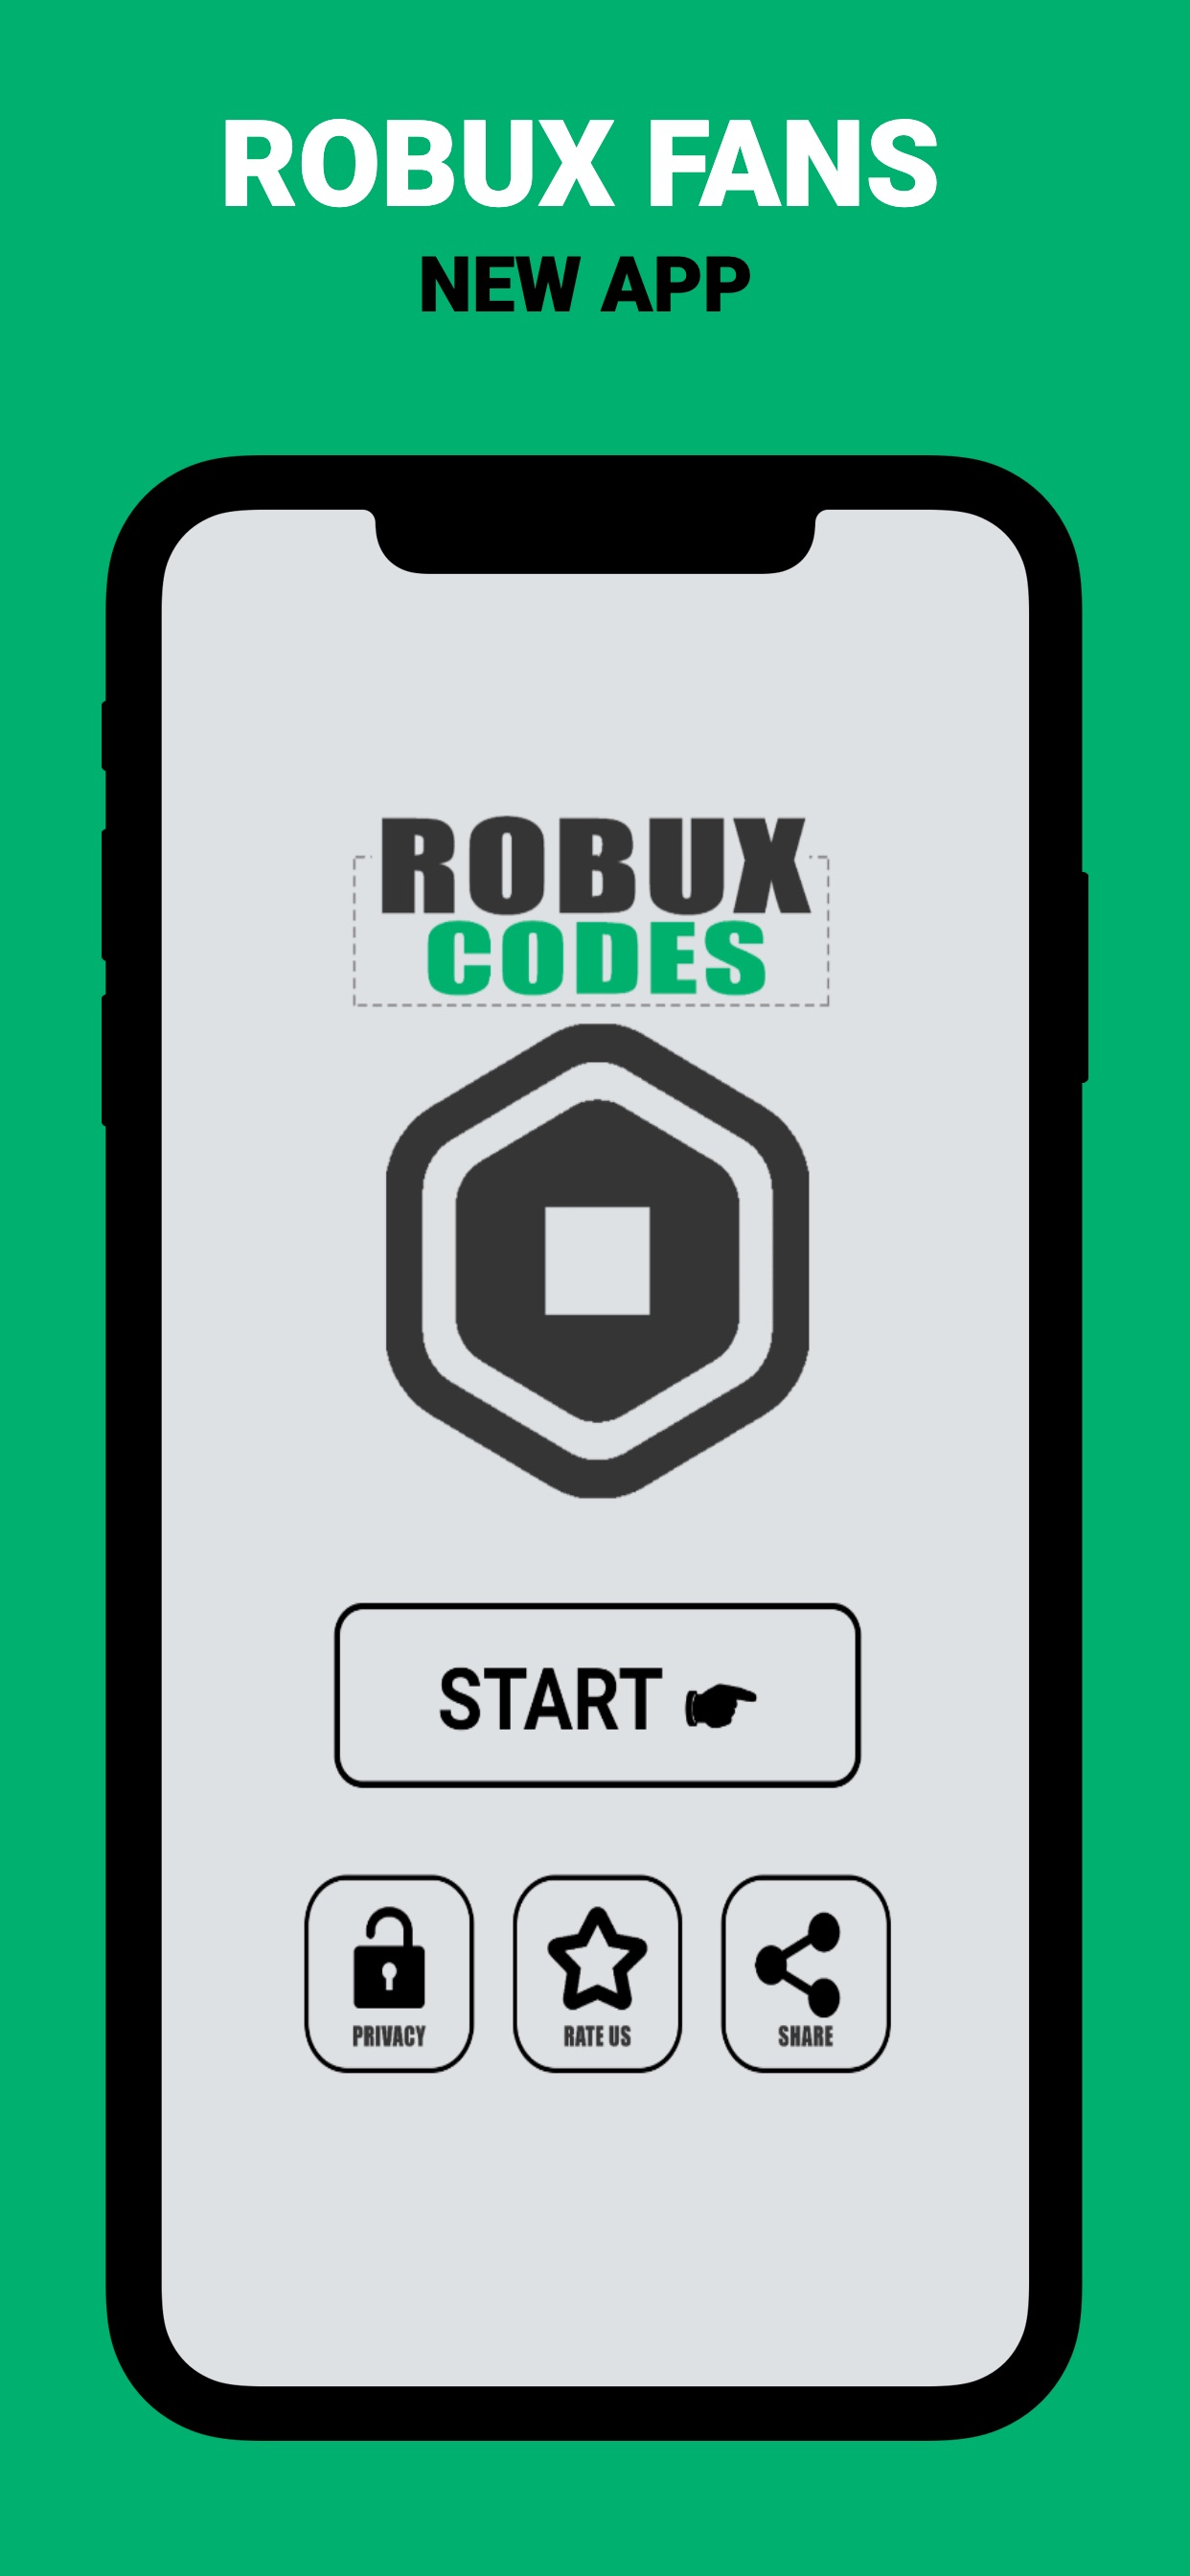 Robux Codes For Roblox App Store Review Aso Revenue Downloads Appfollow - roblox phone number saudi